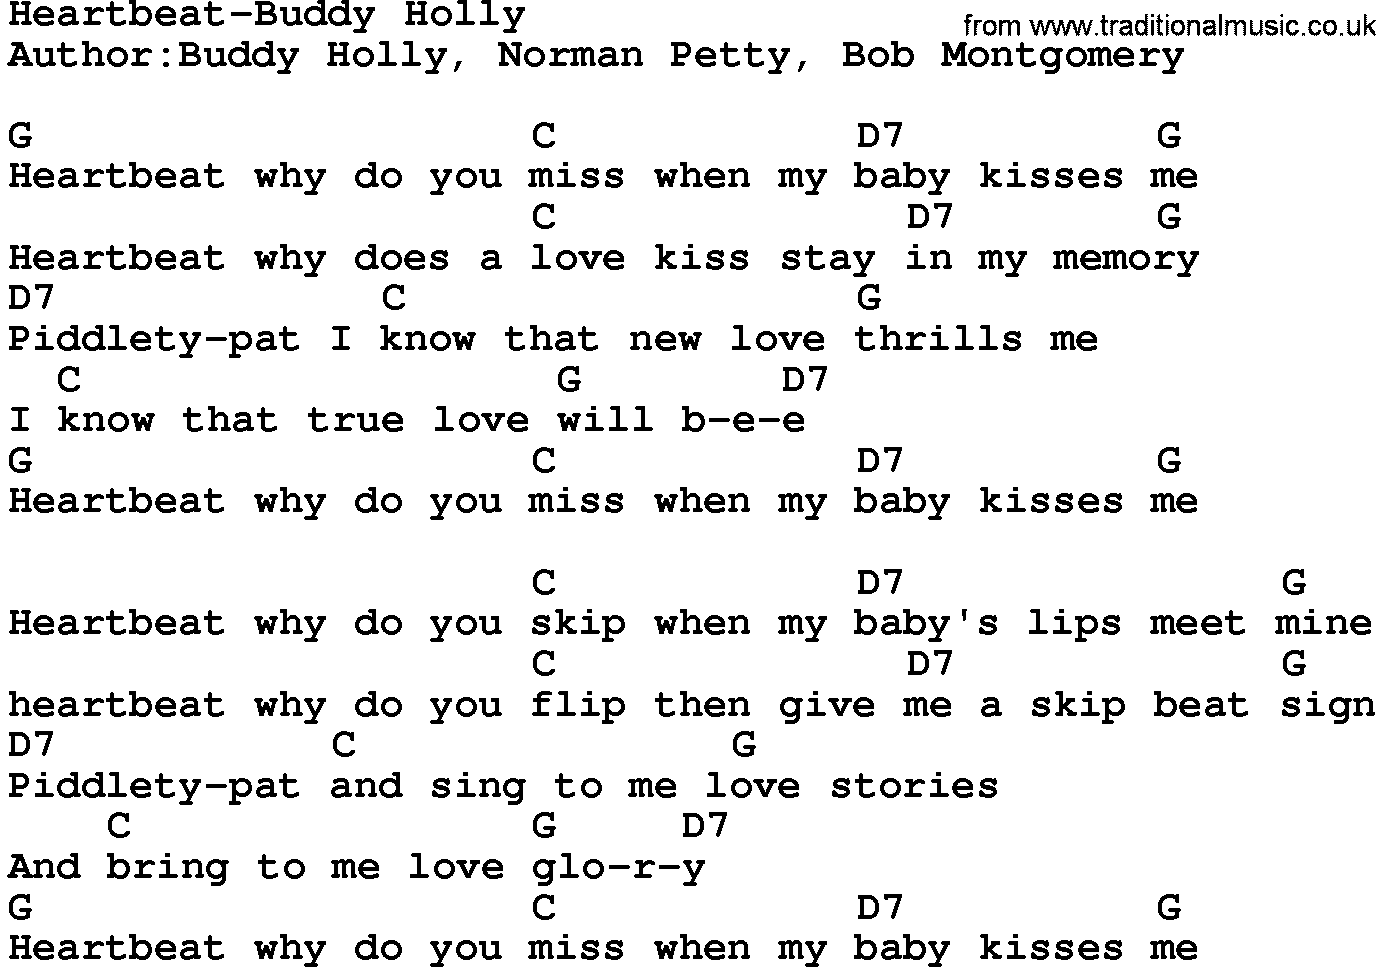 Country music song: Heartbeat-Buddy Holly lyrics and chords